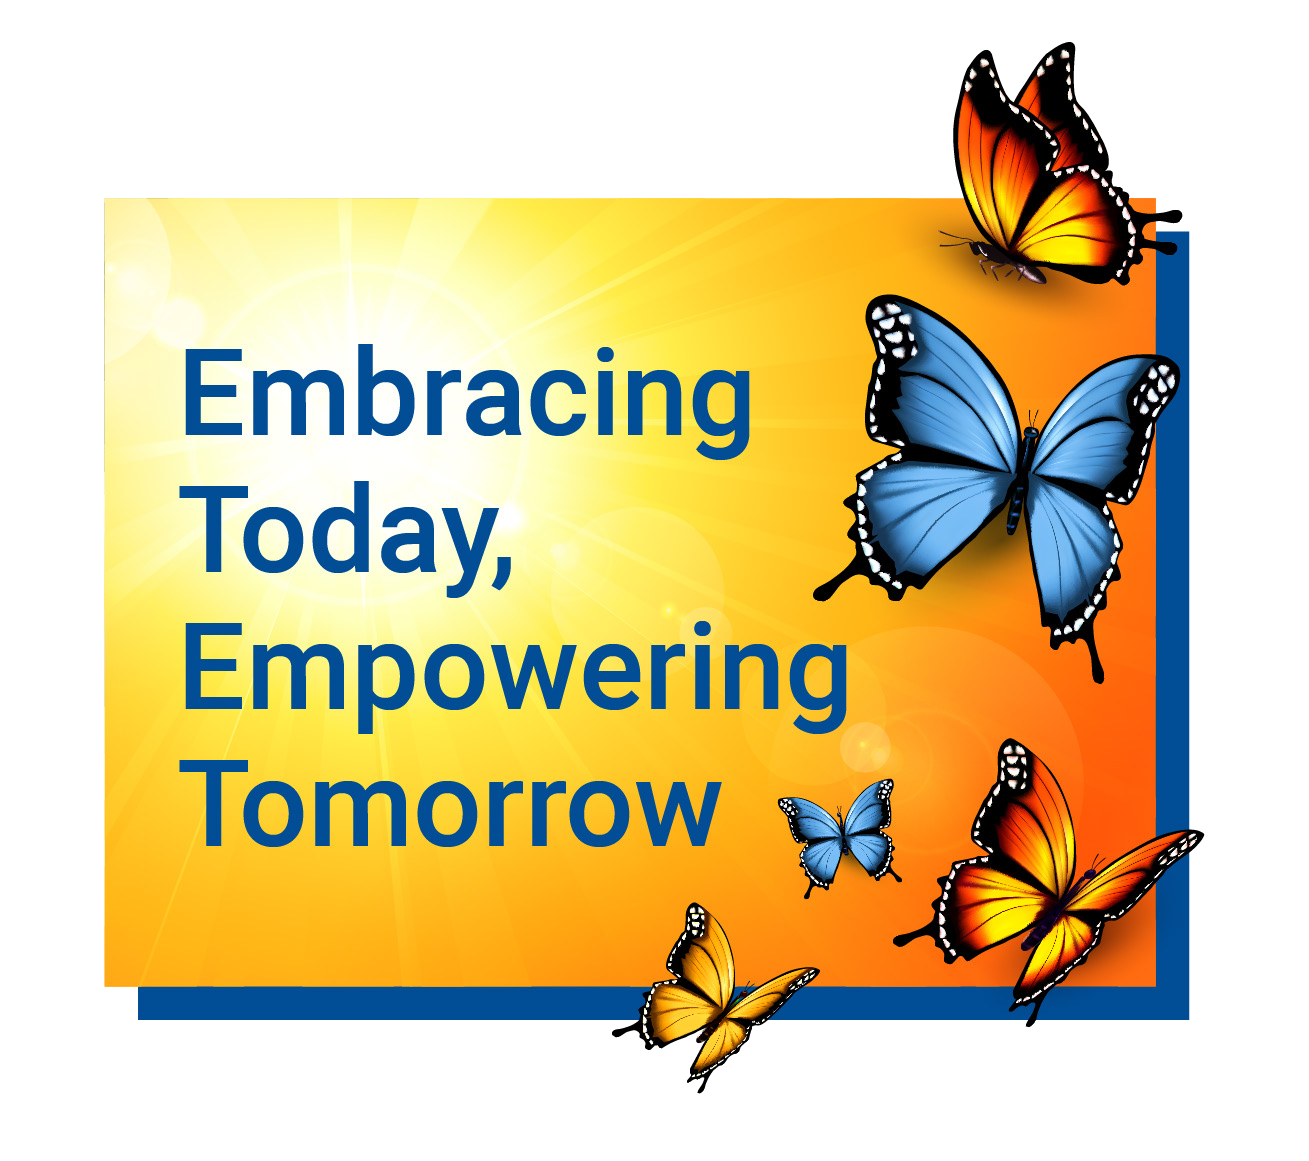 This year’s United Way of South Sarasota County’s annual community luncheon will be themed “Embracing Today, Empowering Tomorrow.” Sponsorship opportunities are currently open for purchase.